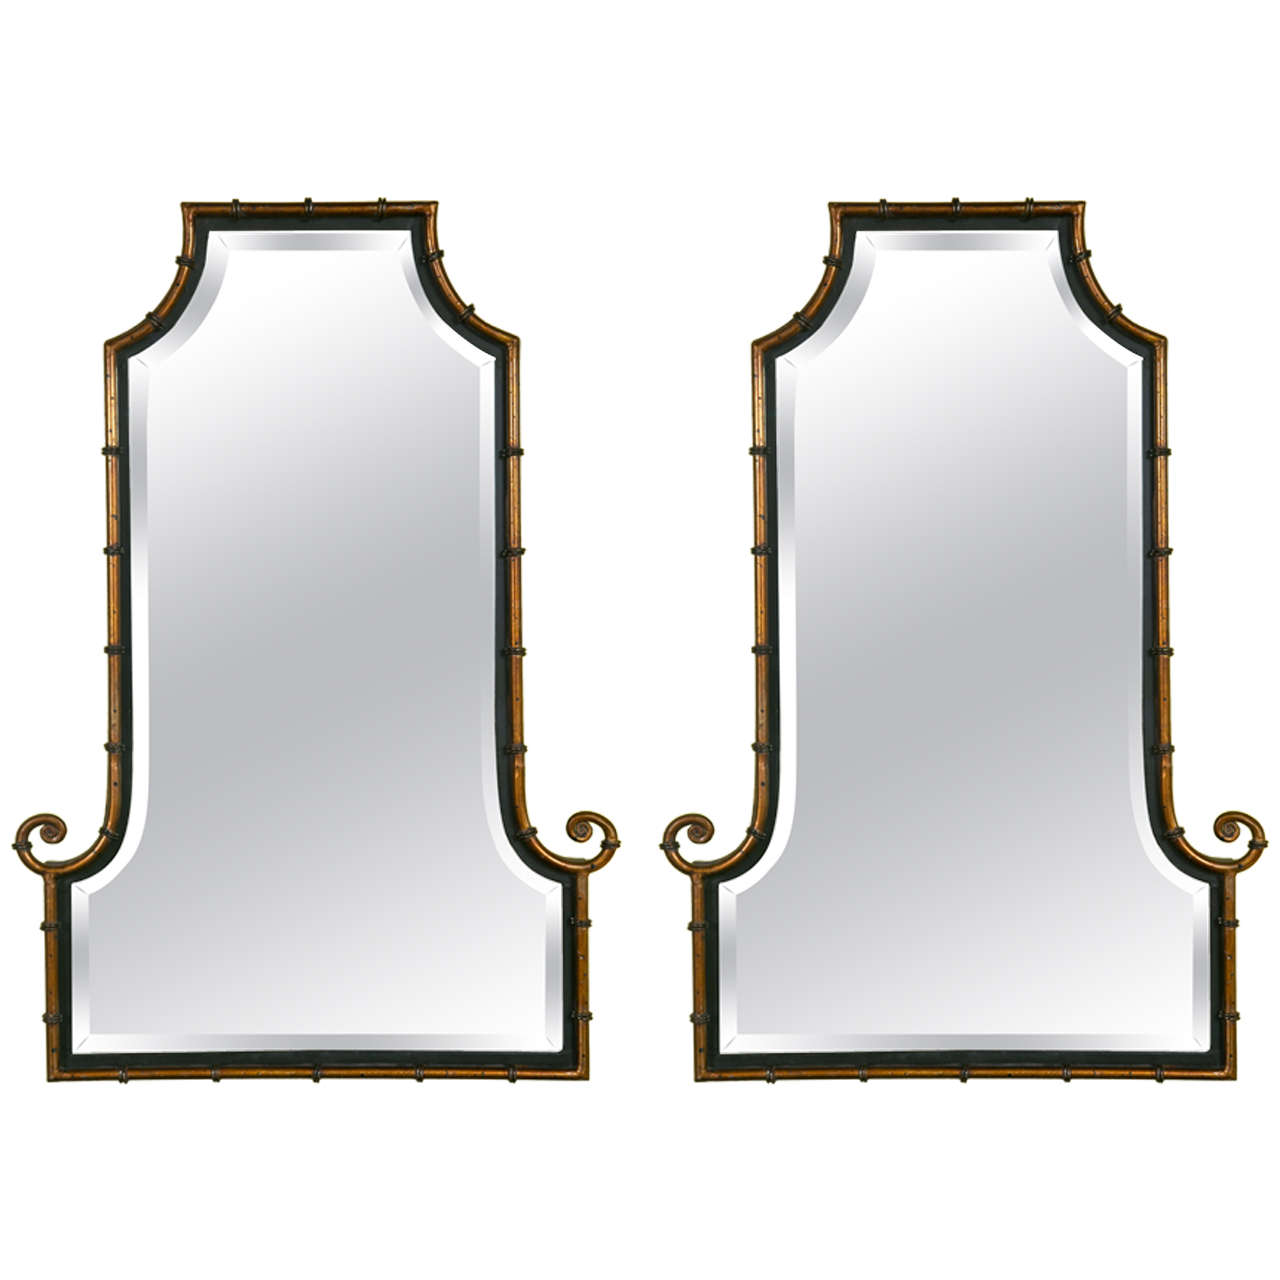 Pair of Vintage Faux Bamboo Style Mirrors